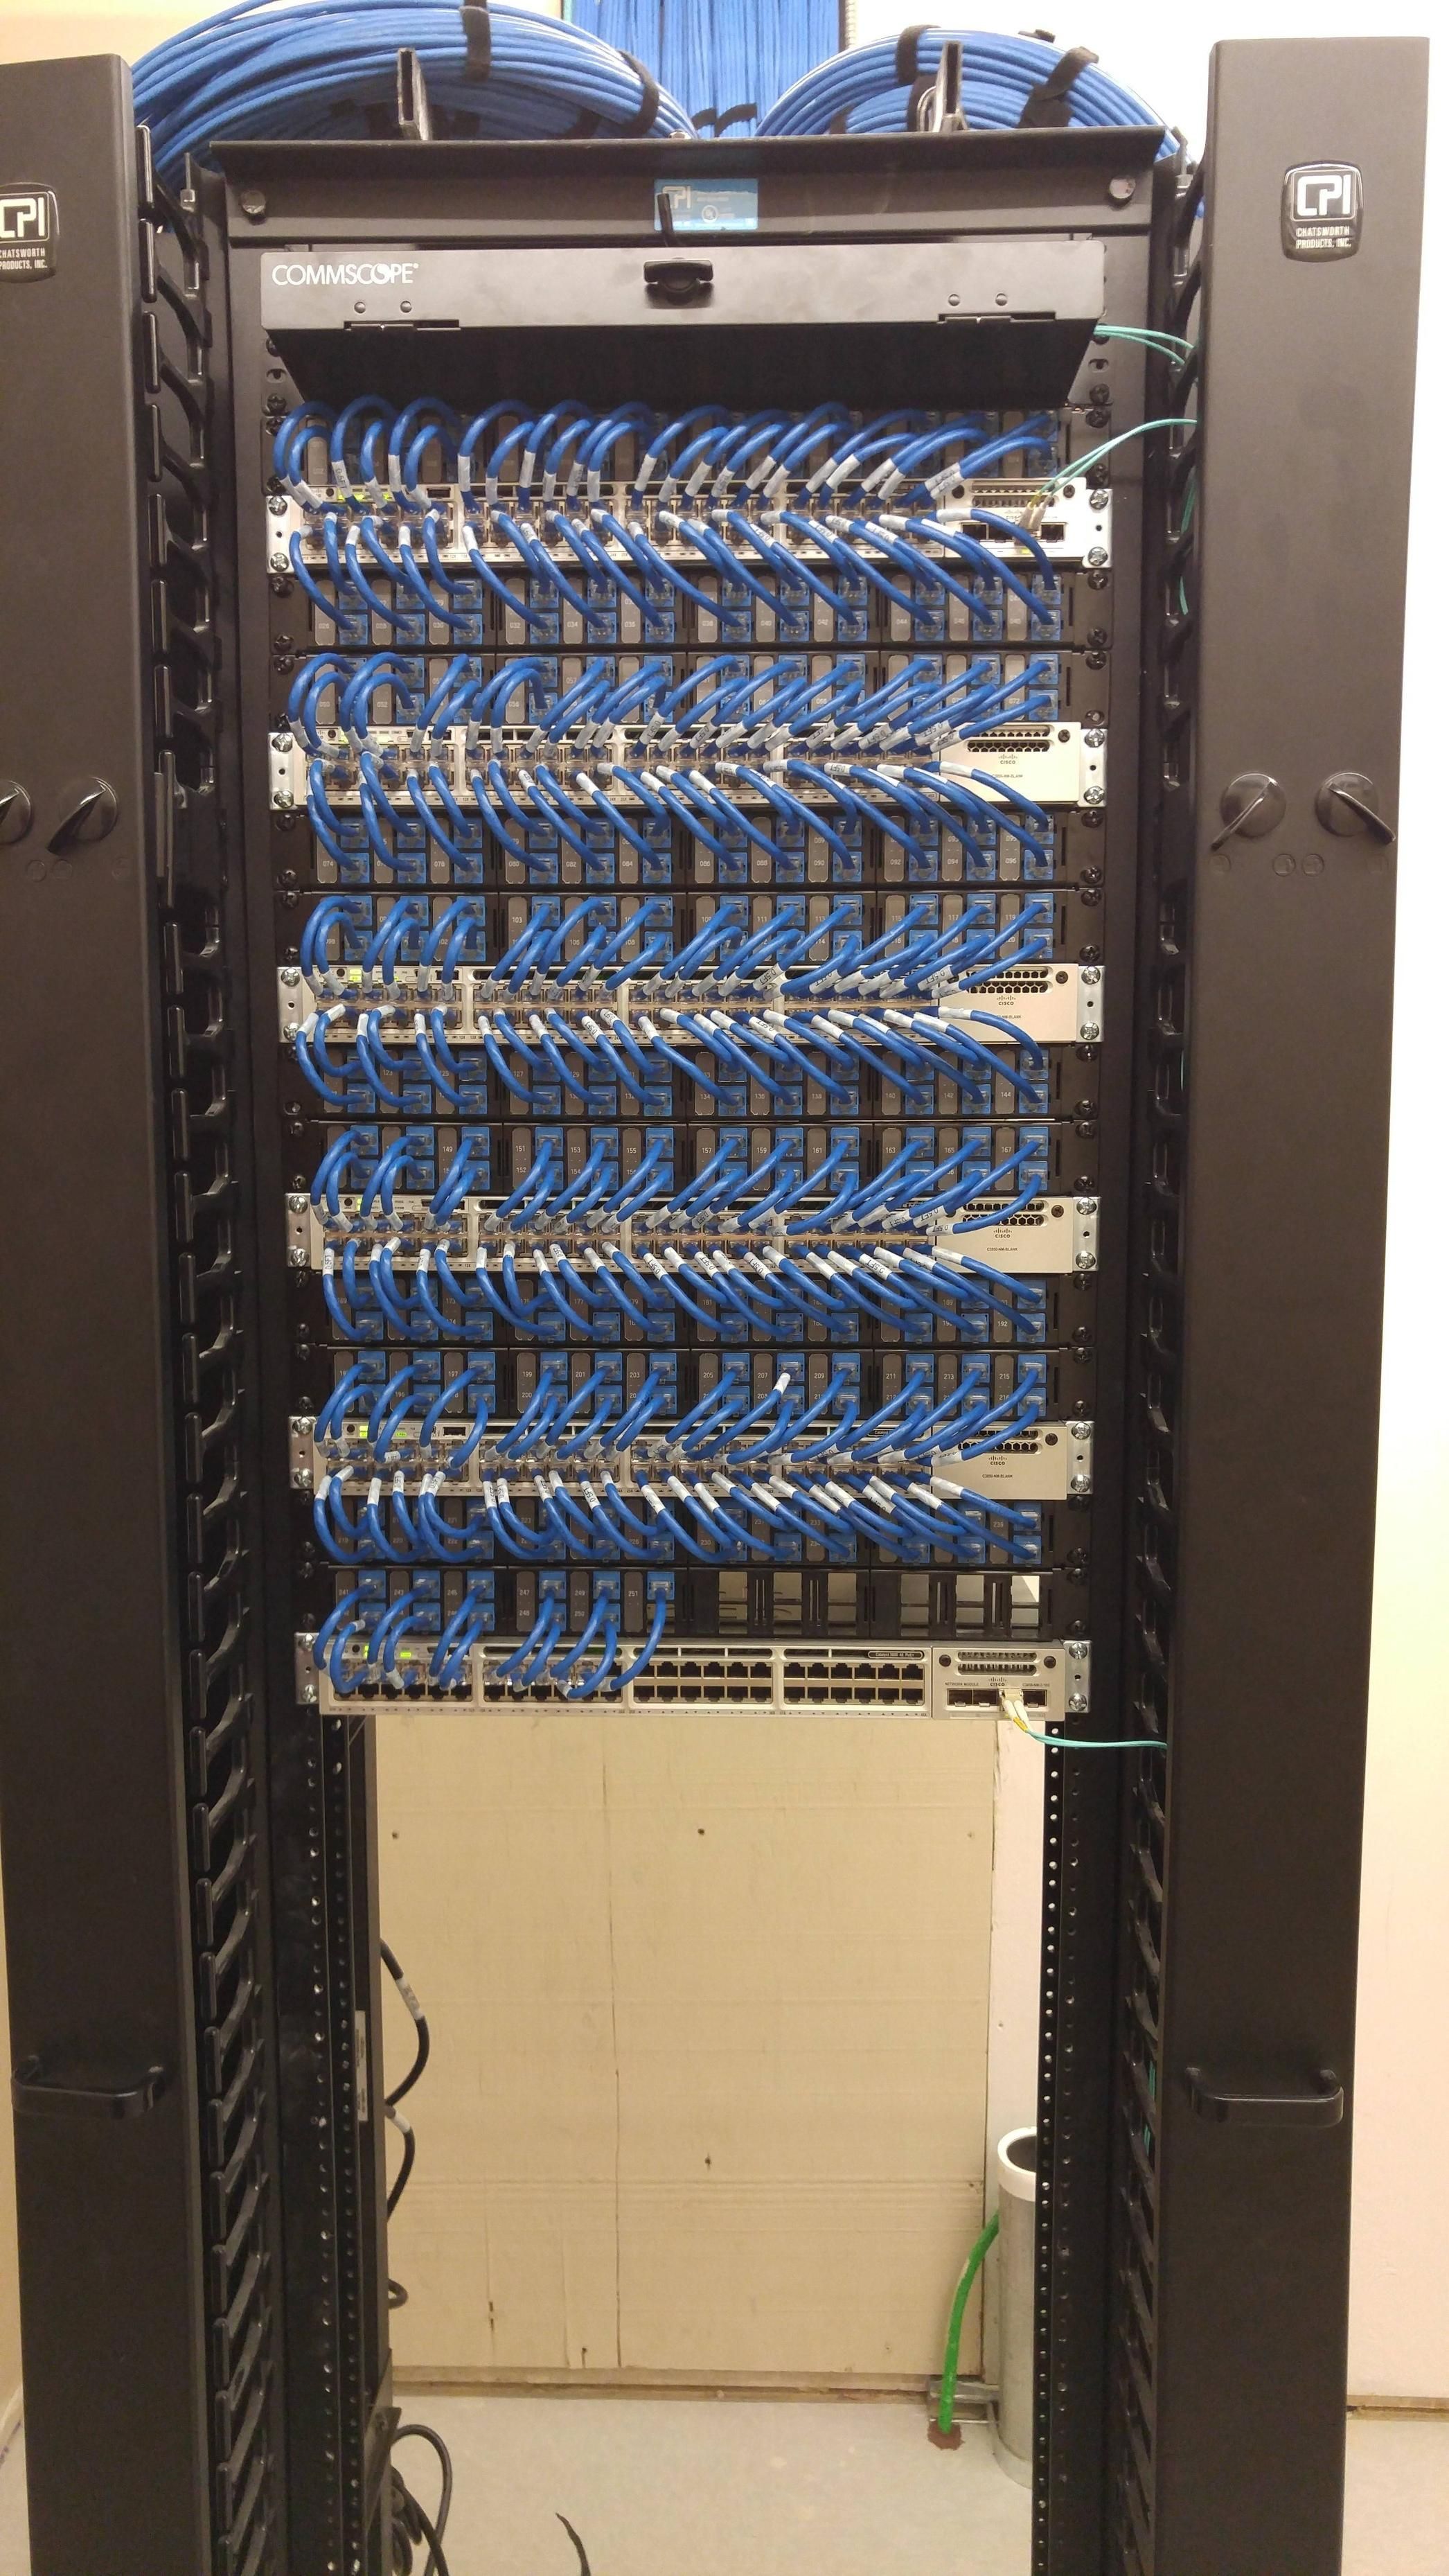 New IDF Closets | Cable, Structured cabling and Tech